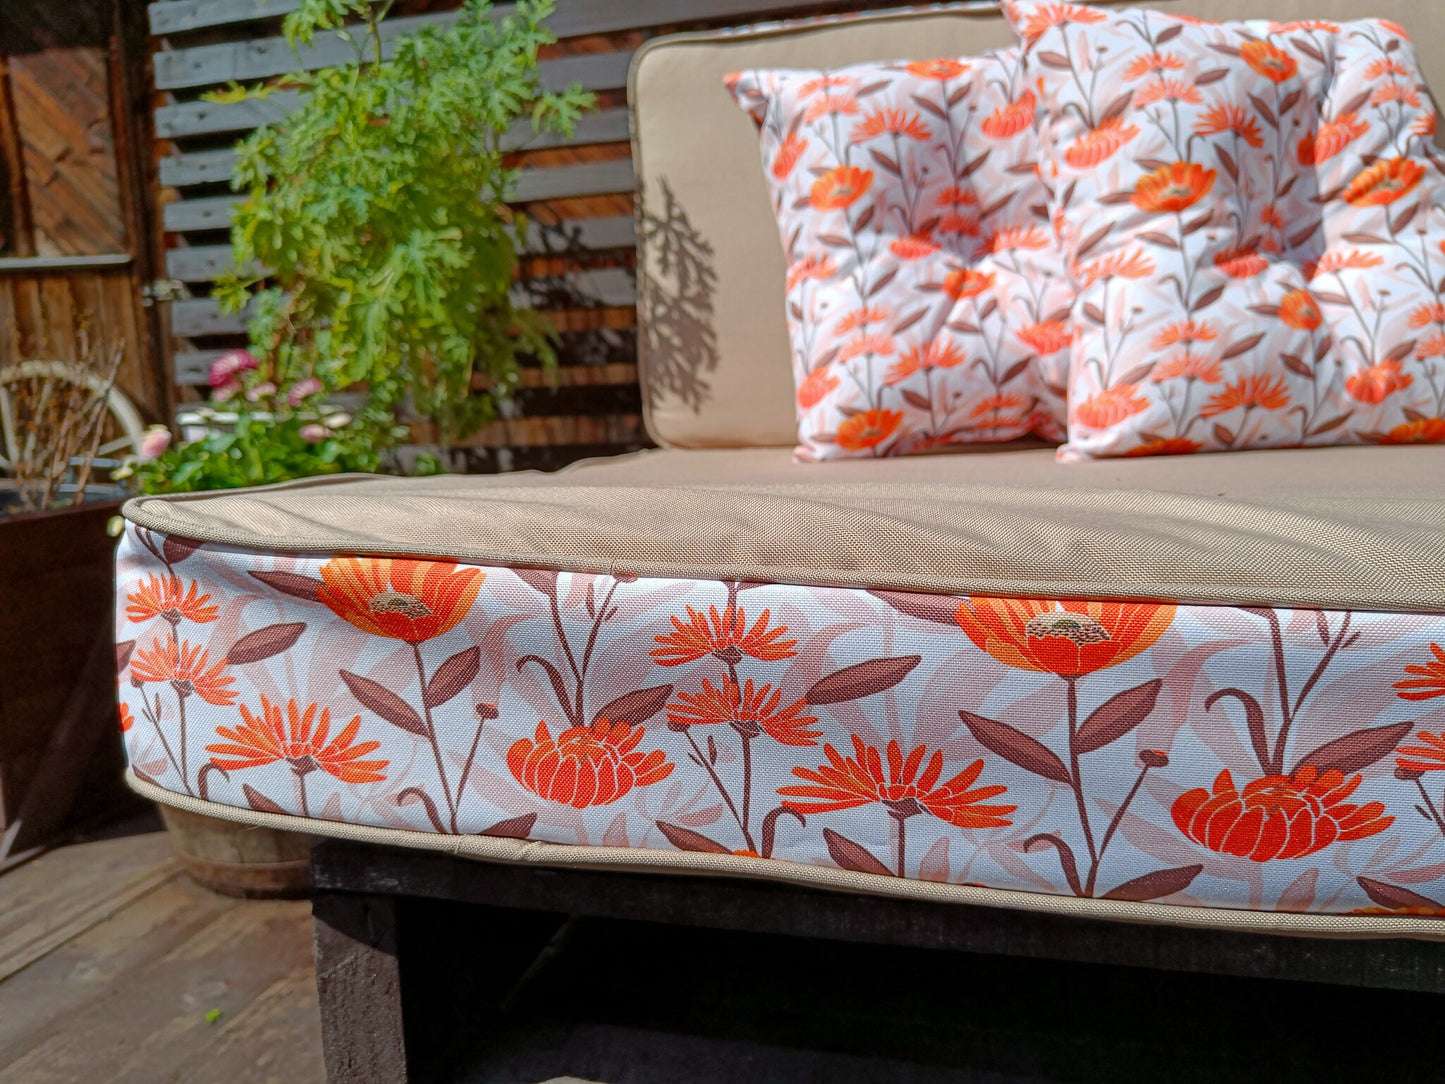 Custom Outdoor Patio Cushions | Bench Water Resistant Cushions | Seating for Garden Furniture | Seat and Backrest Outdoor Cushions